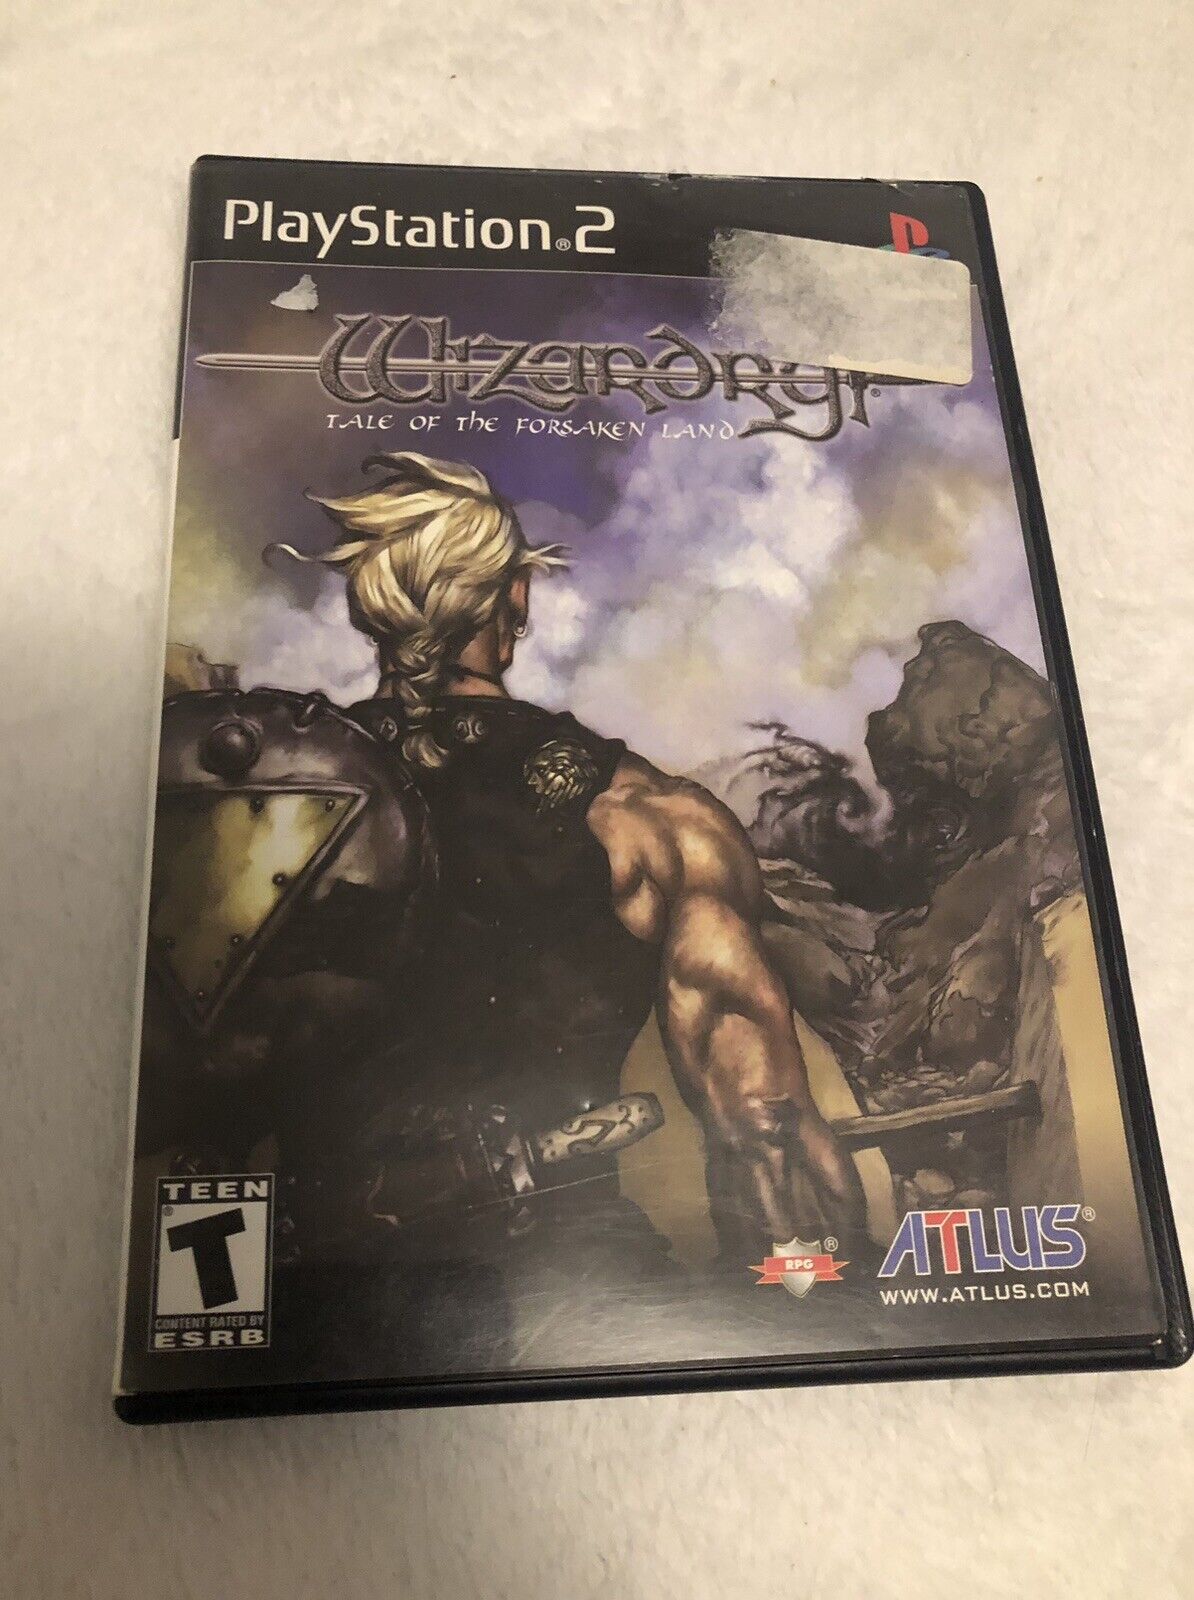 Wizardry: Tale of the Forsaken Land - PS2 - Case and Game